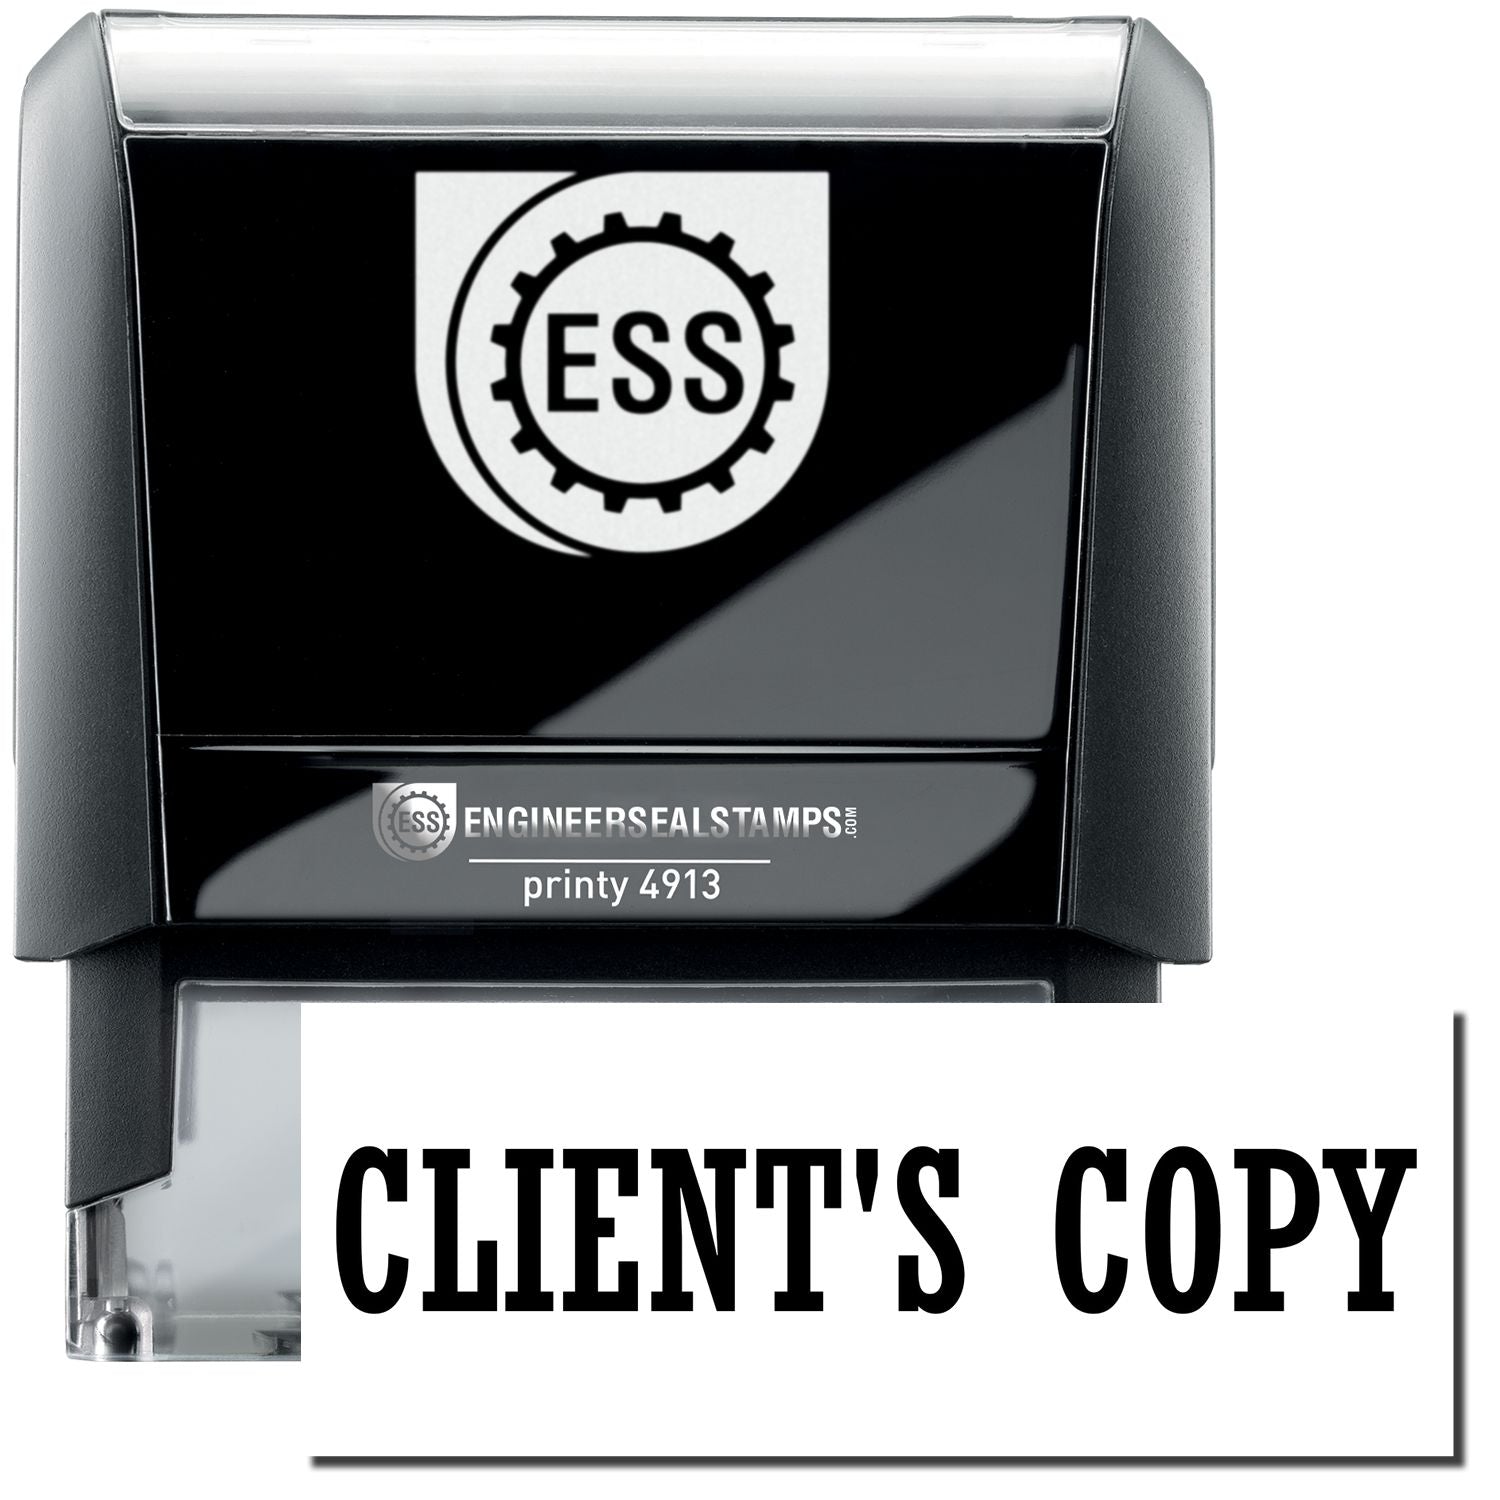 A self-inking stamp with a stamped image showing how the text "CLIENT'S COPY" in a large bold font is displayed by it.